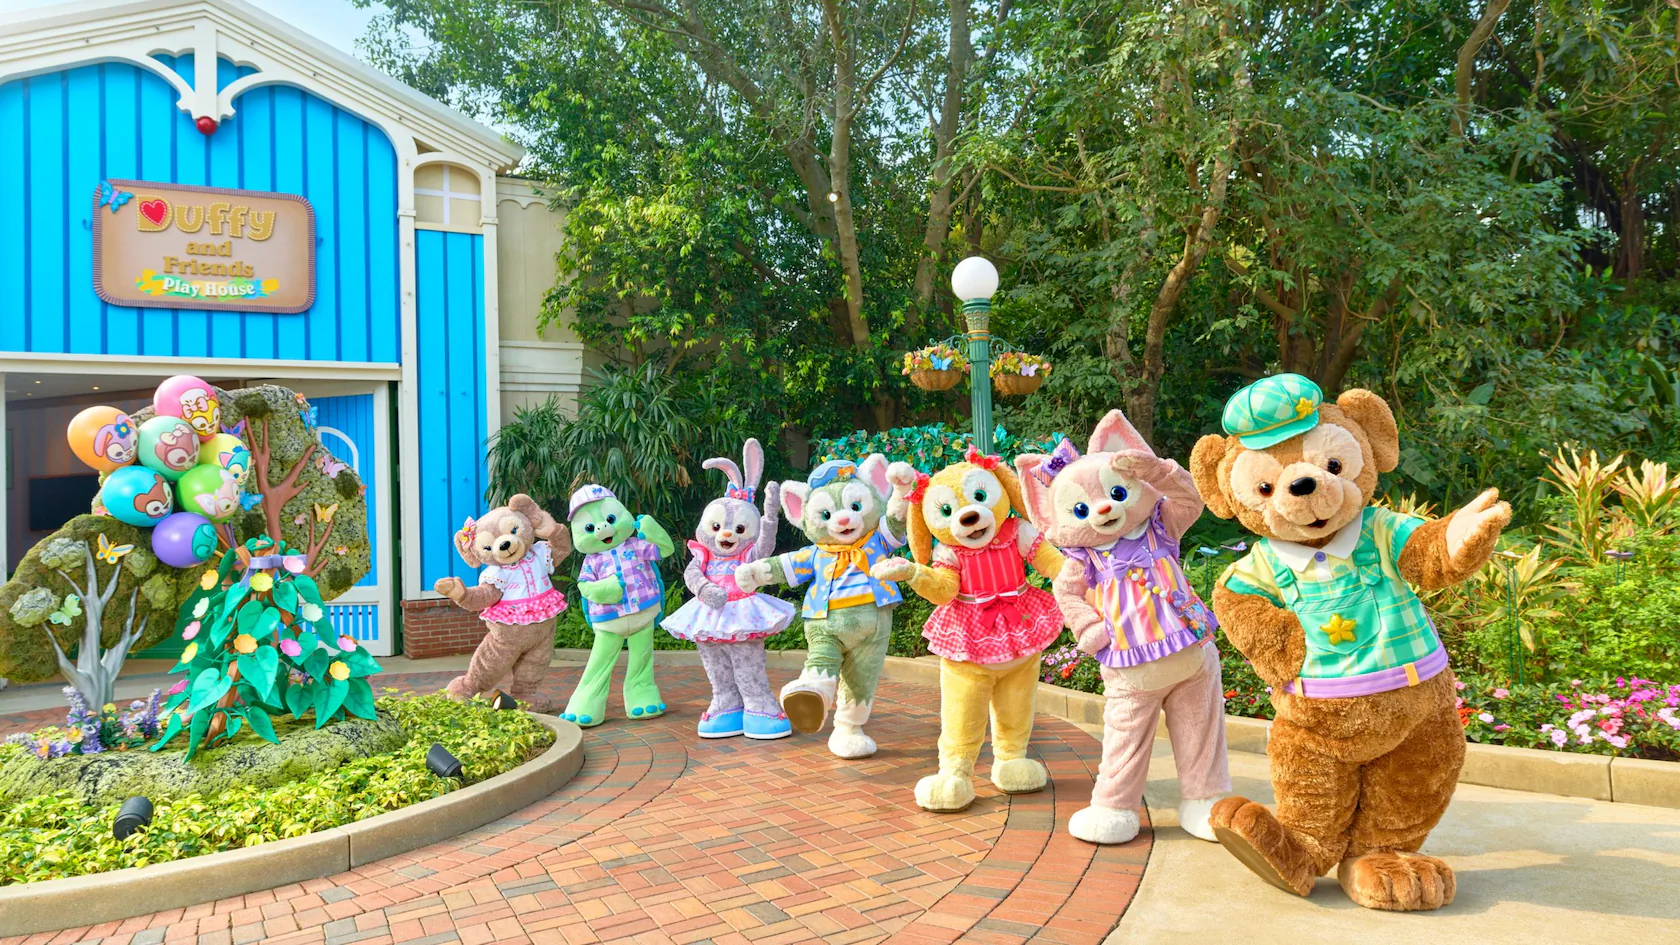 Duffy and friends